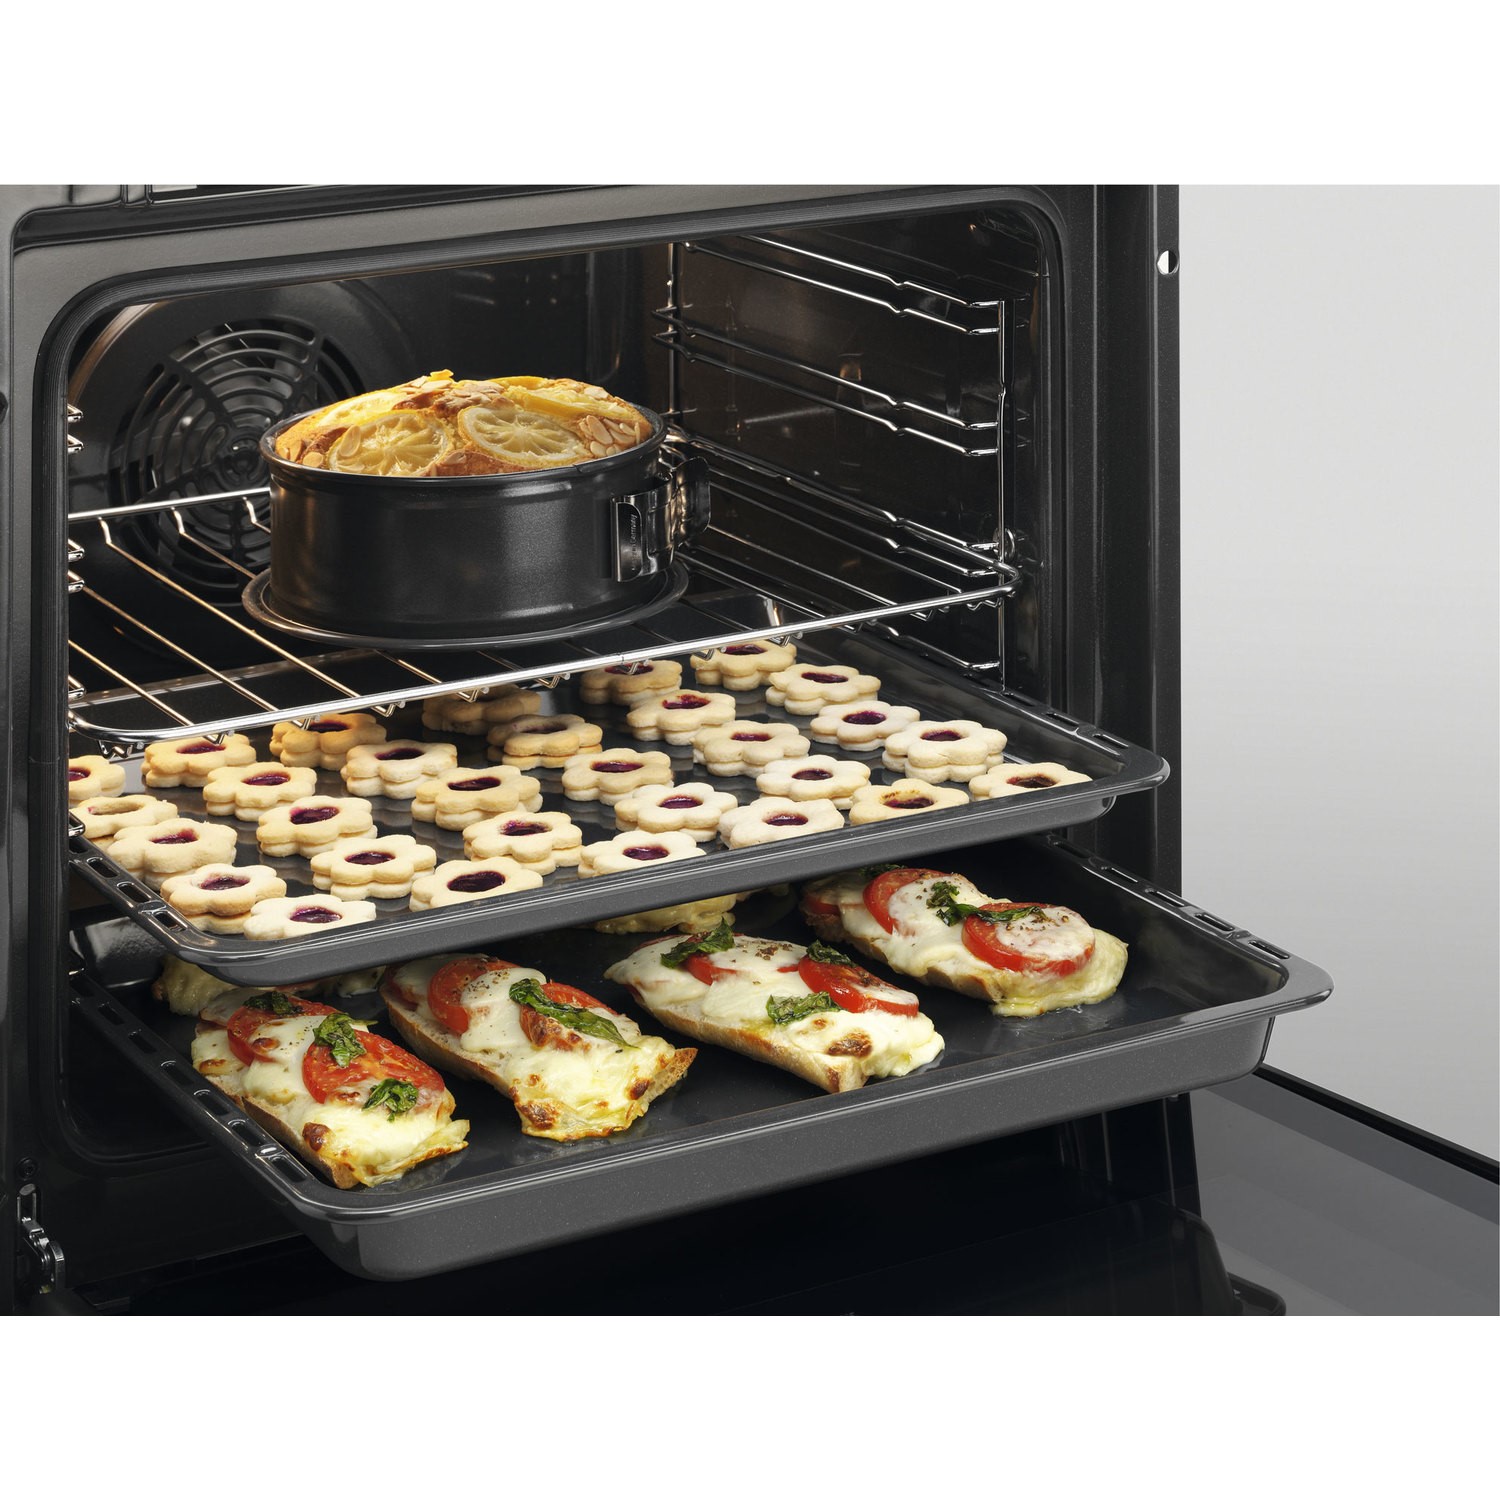 AEG 60cm Double Oven Dual Fuel Cooker with Lid - Stainless Steel ...